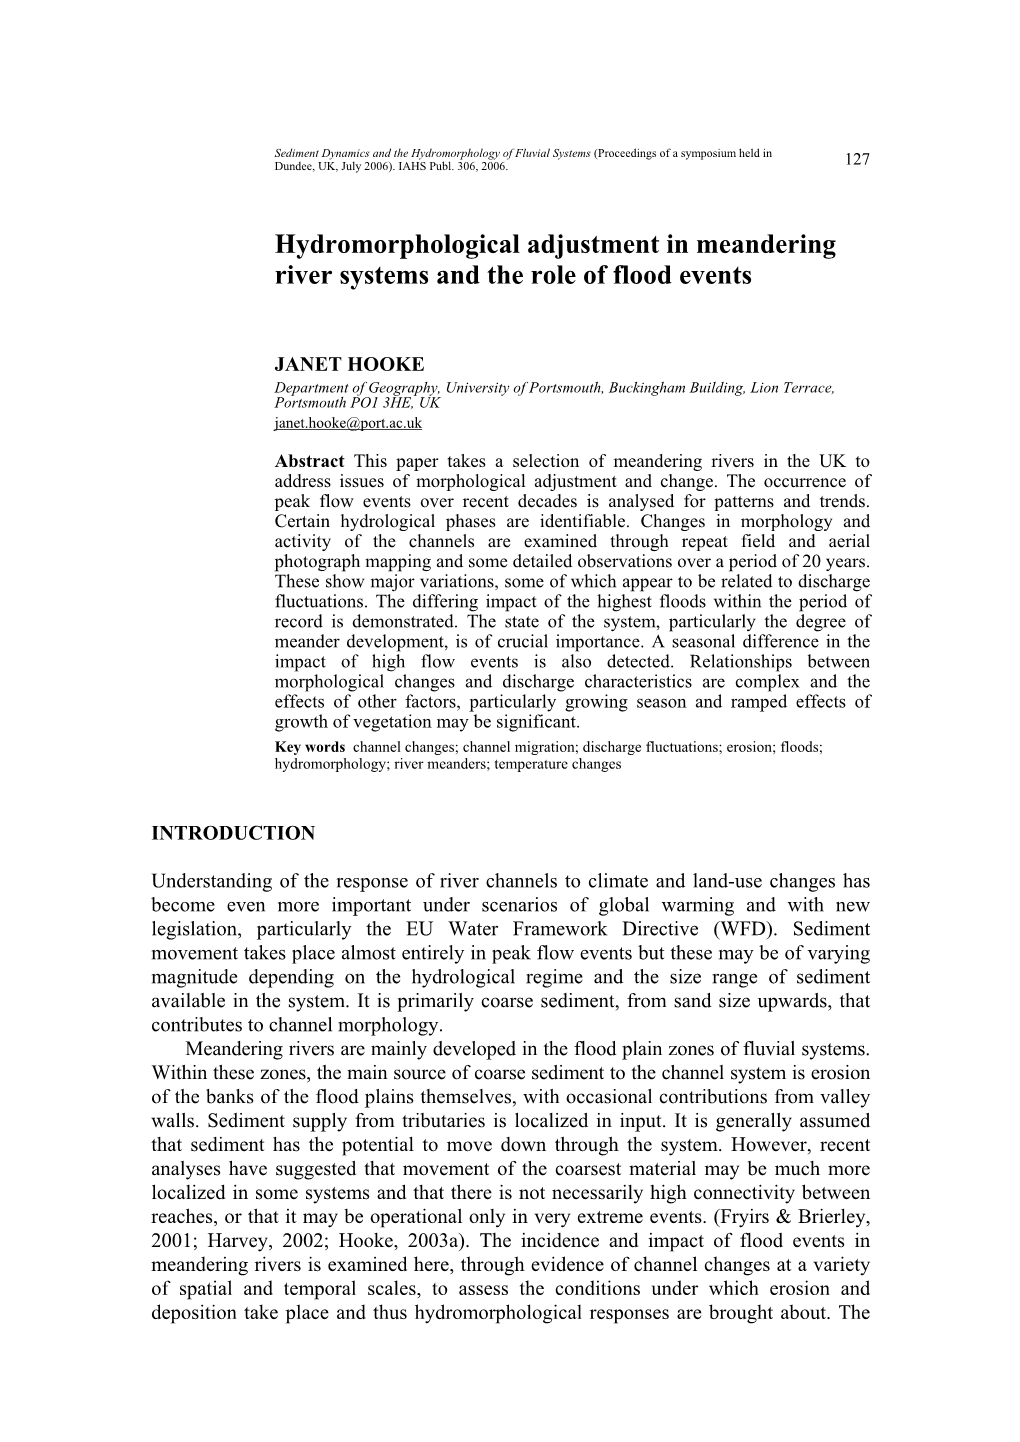 Hydromorphological Adjustment in Meandering River Systems and the Role of Flood Events